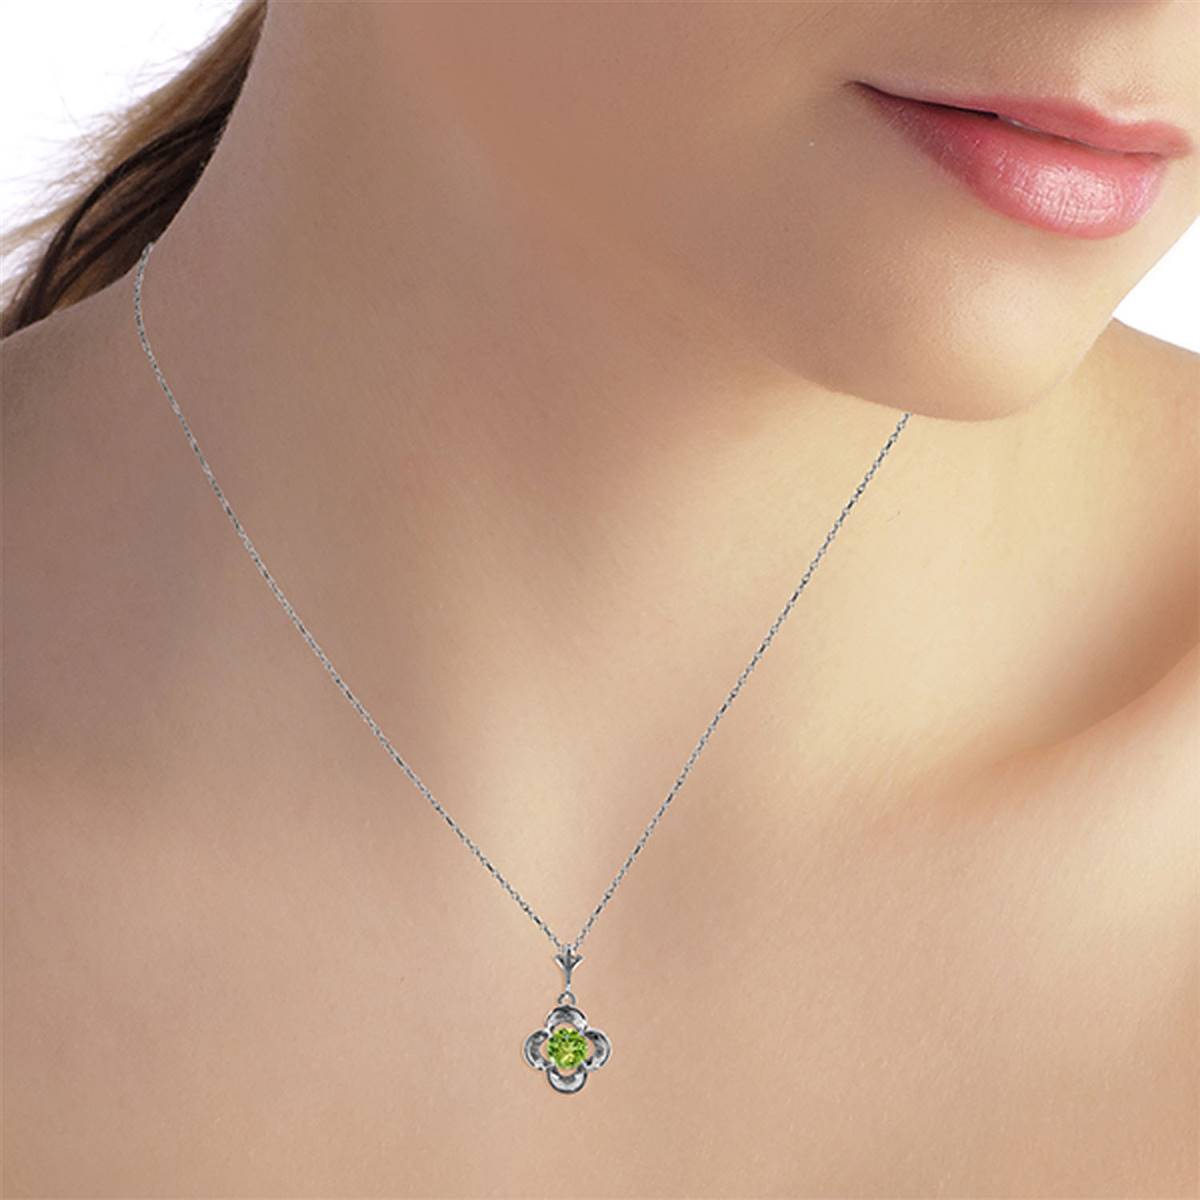 0.55 Carat 14K Solid White Gold Warm Life Peridot Necklace